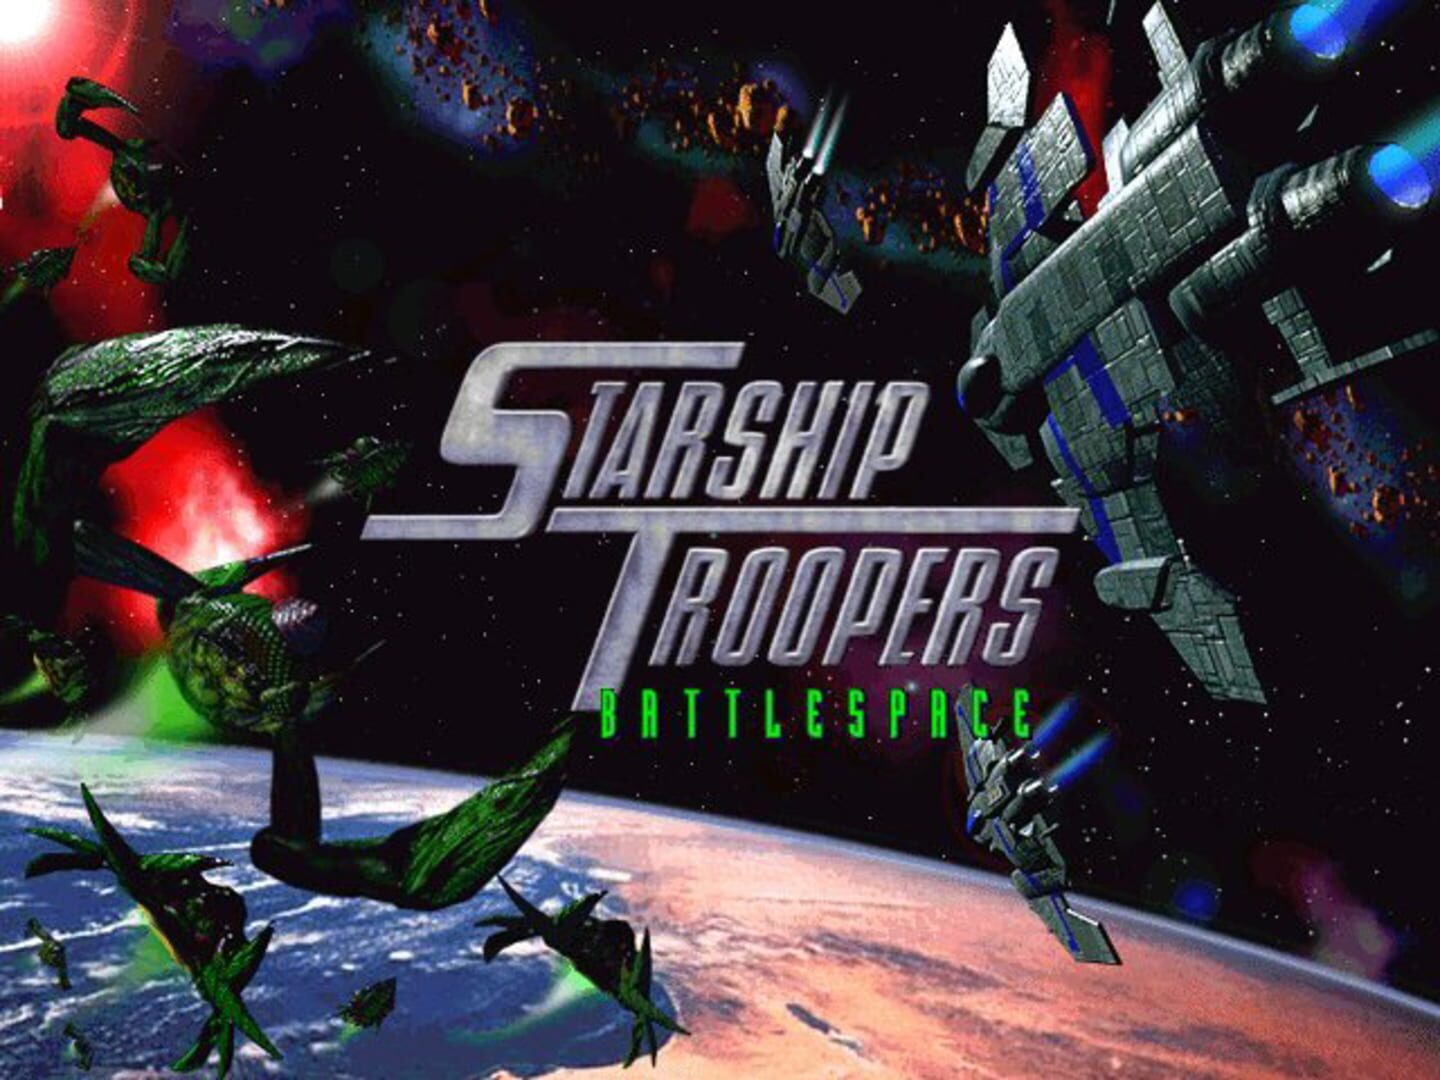 Starship Troopers: Battlespace featured image